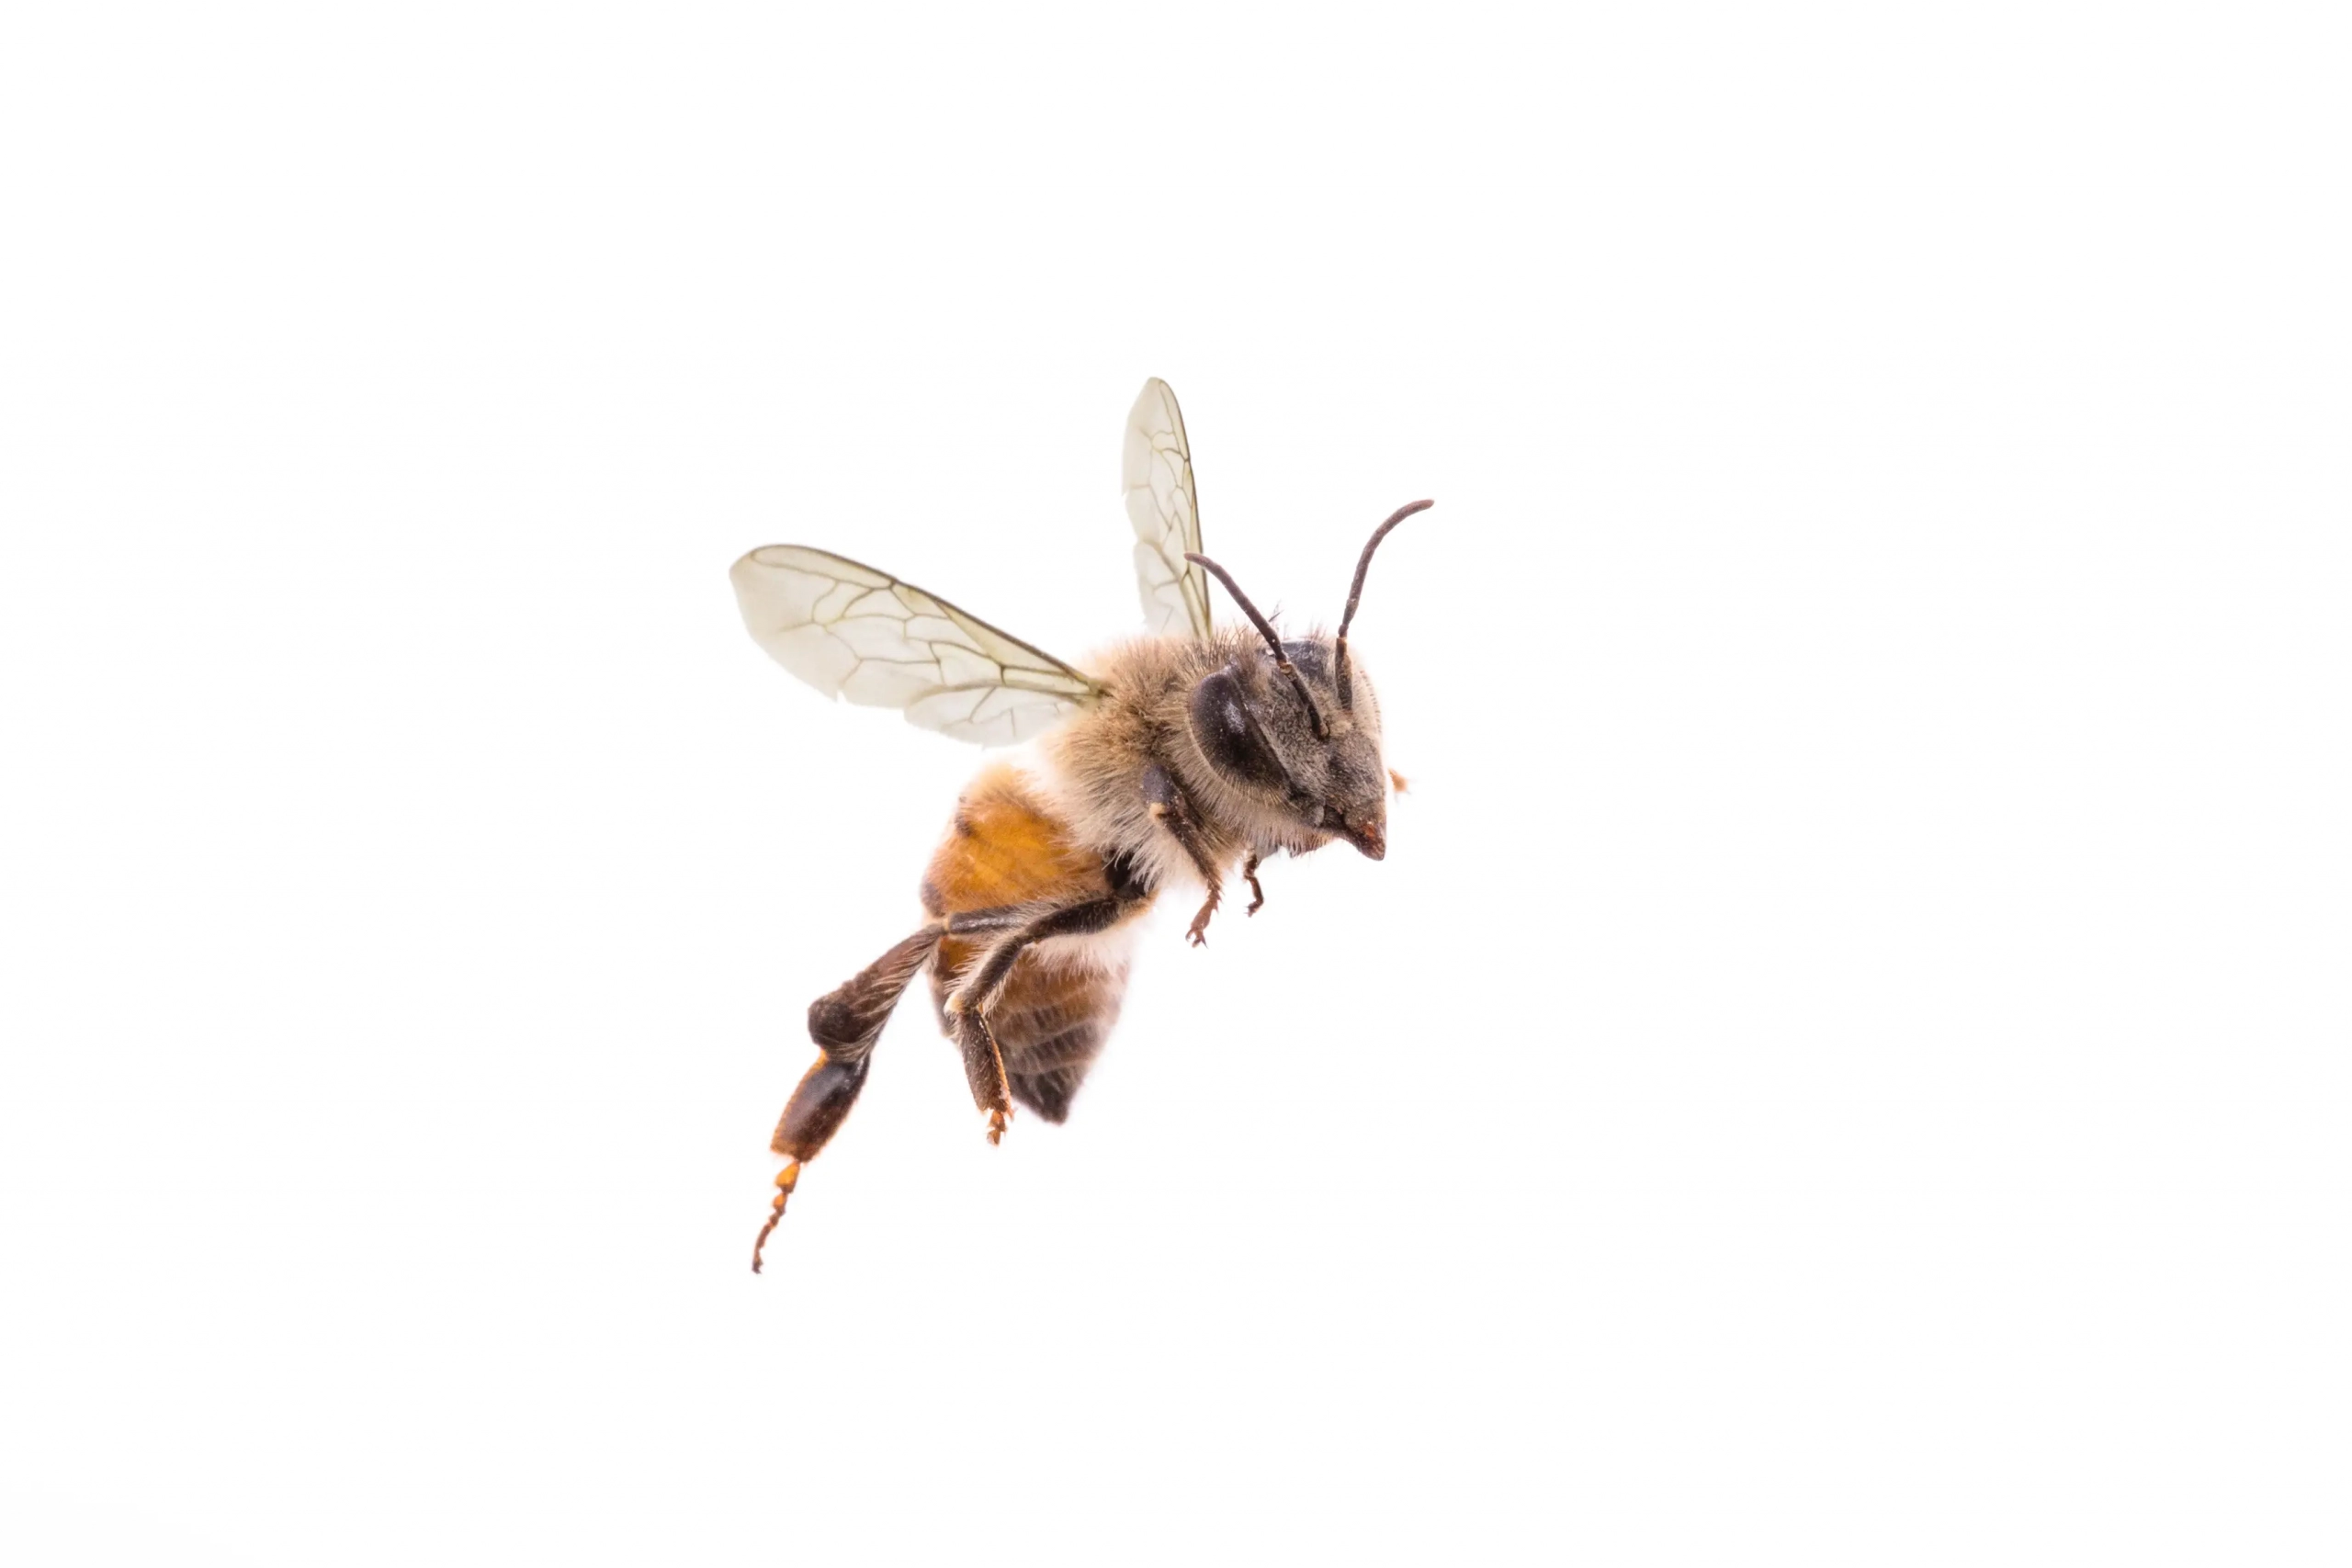 Close-up image of a bee flying in white background